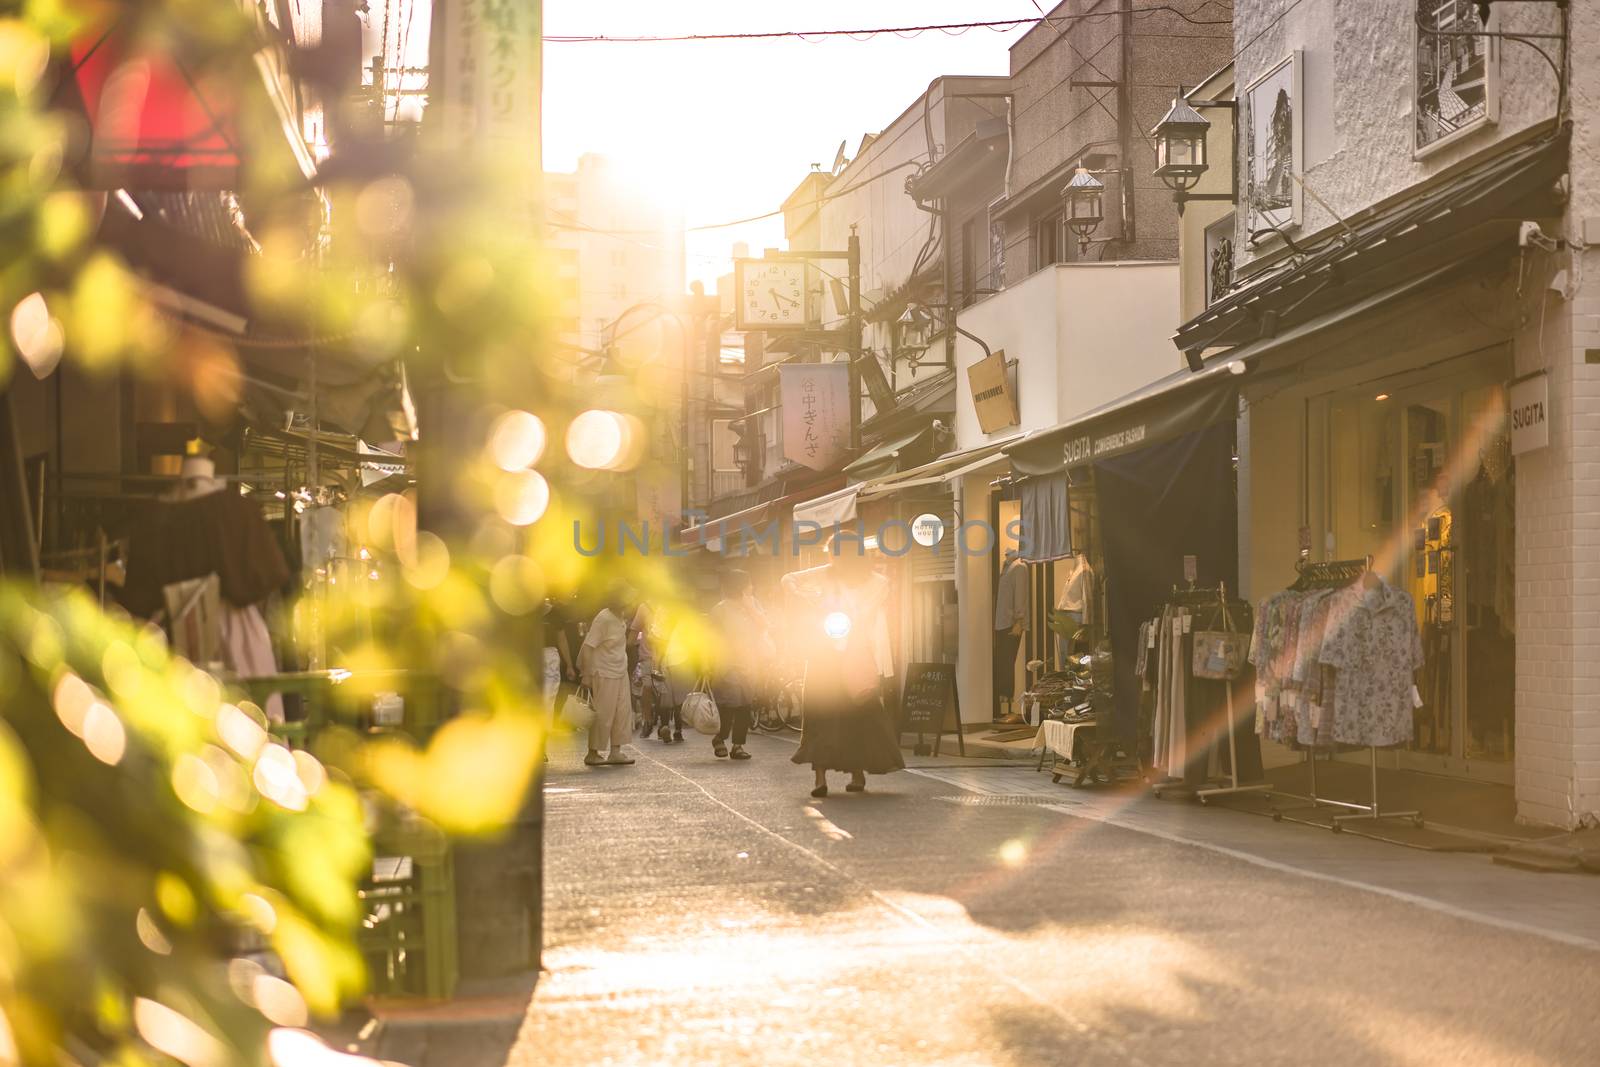 Old-fashionned shopping street Yanaka Ginza famous as a spectacular spot for sunset golden hour from the Yuyakedandan stairs which means Dusk Steps at Nishi-Nippori in Tokyo. Yanaka Ginza is also named the Evening Village.